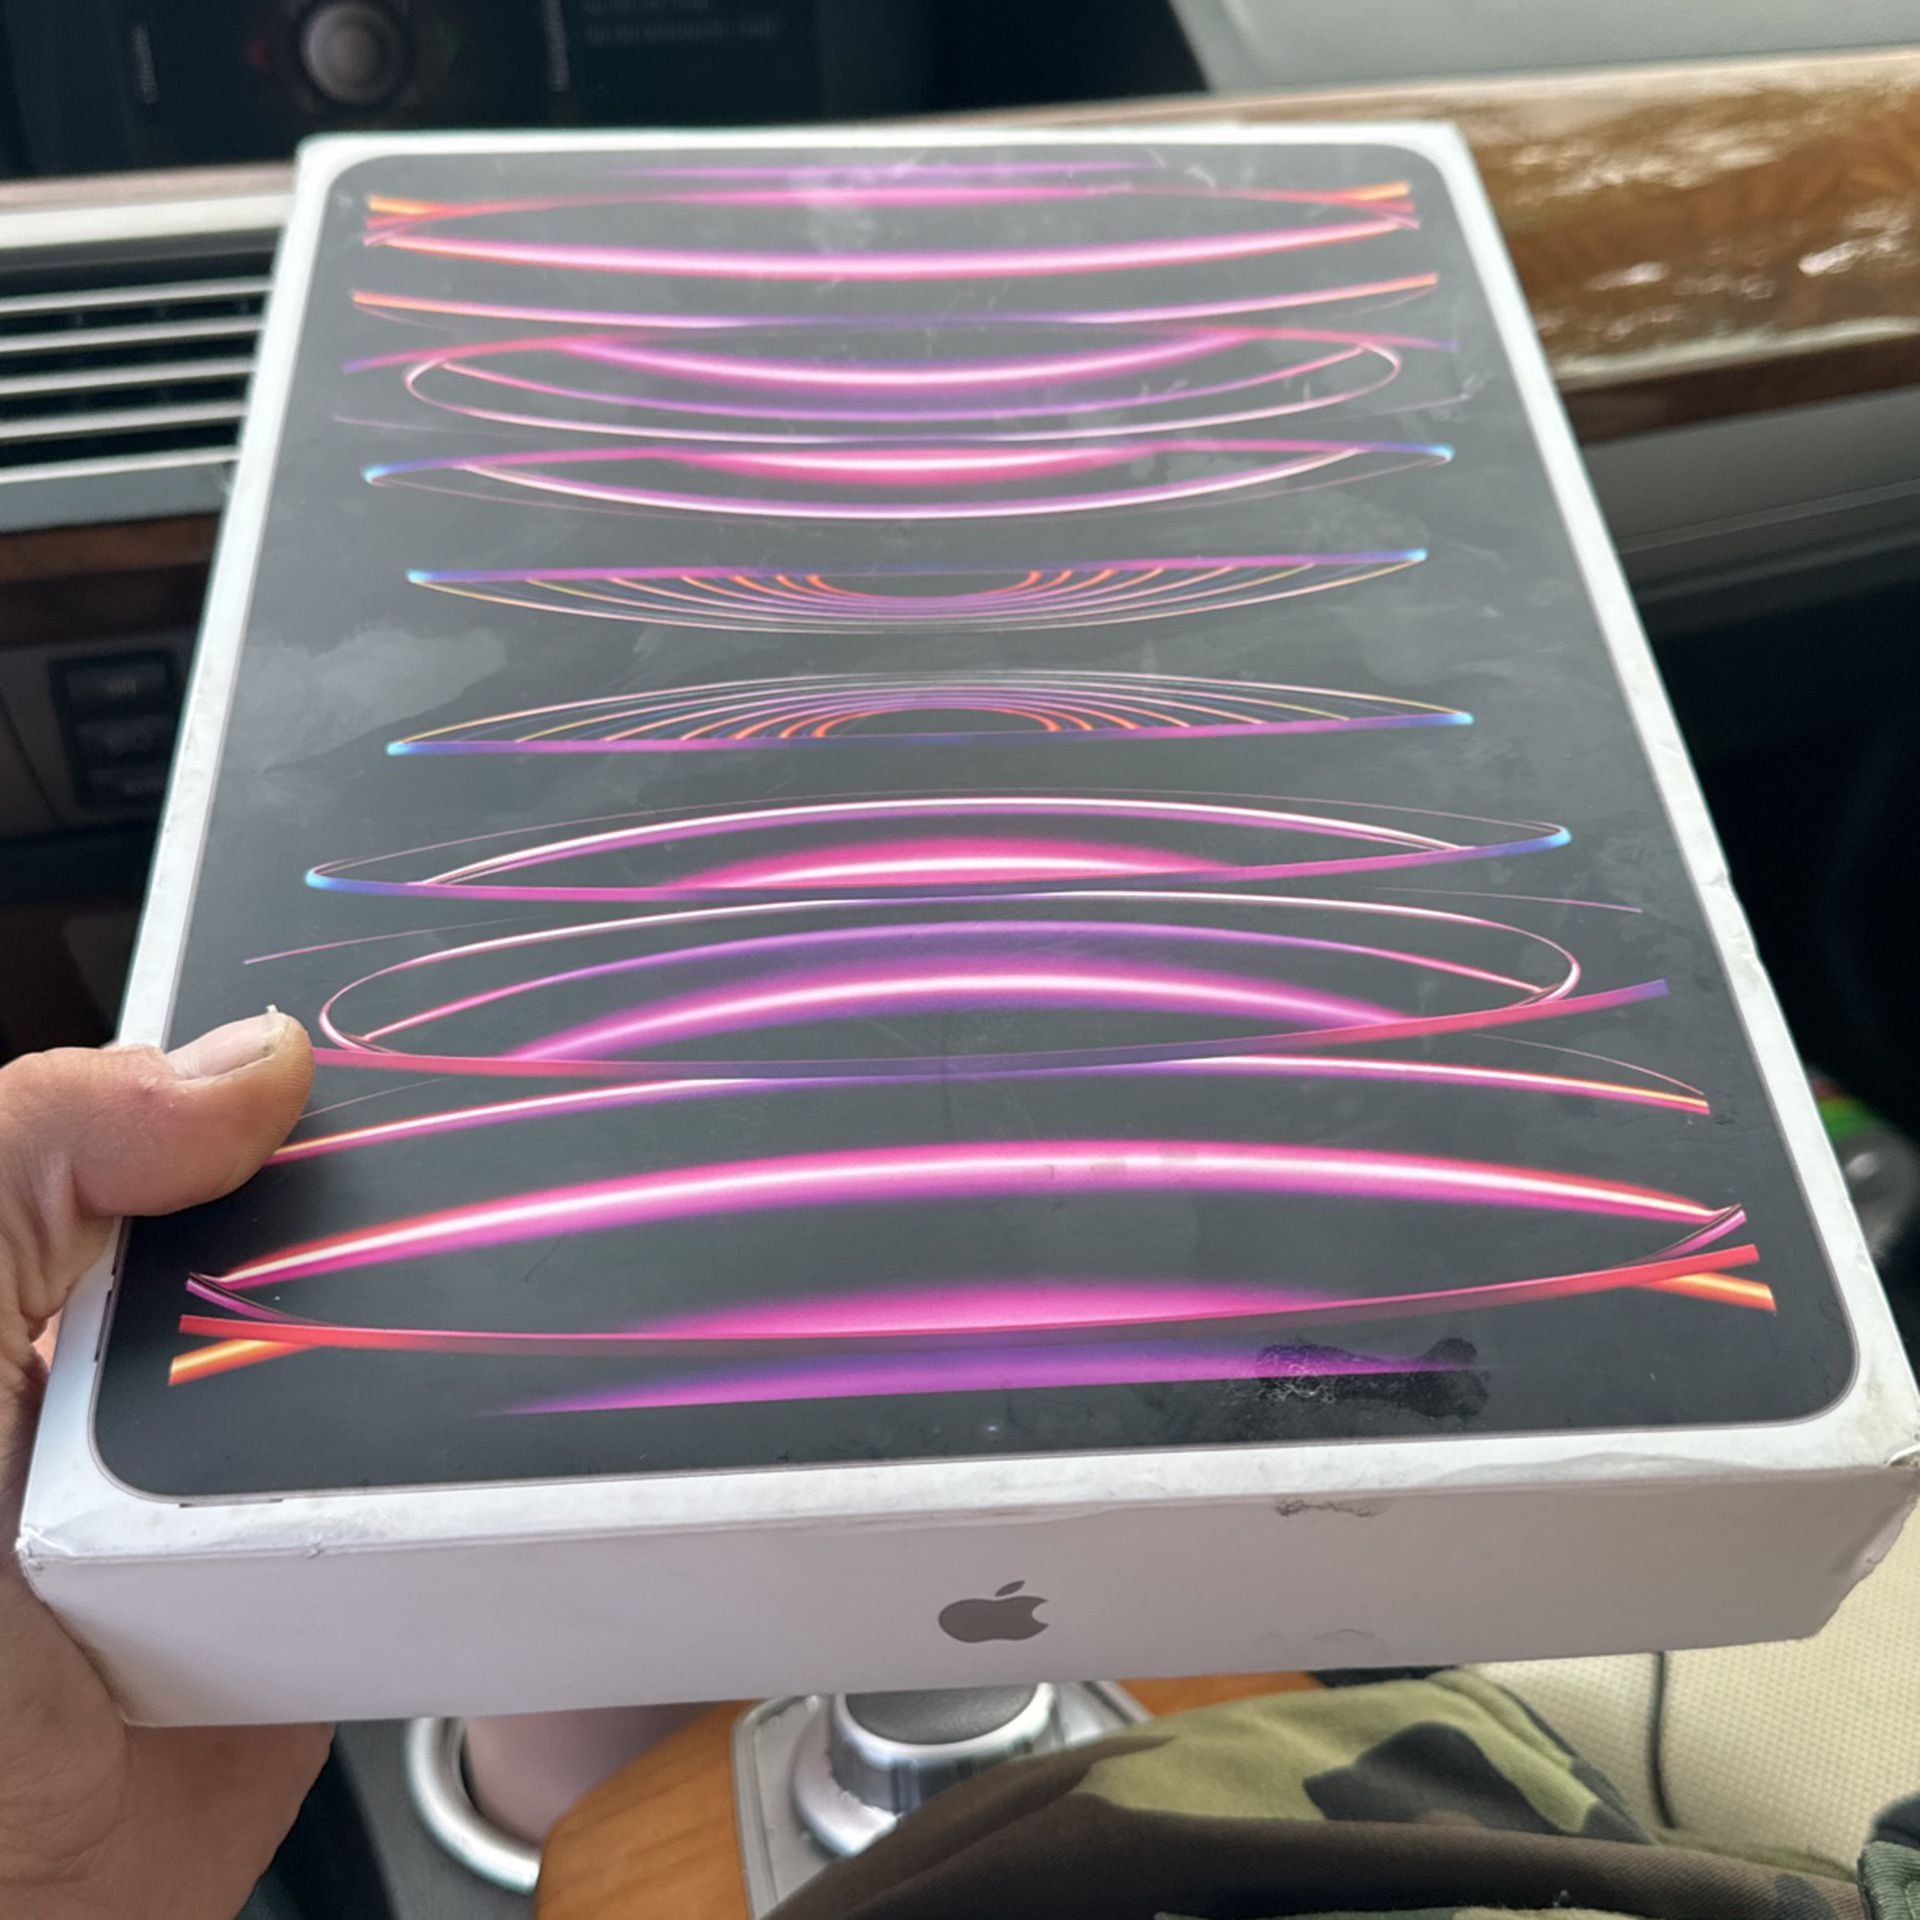 Apple - 12.9-Inch iPad Pro (Latest Model) with Wi-Fi + Cellular - 128GB - Space Gray